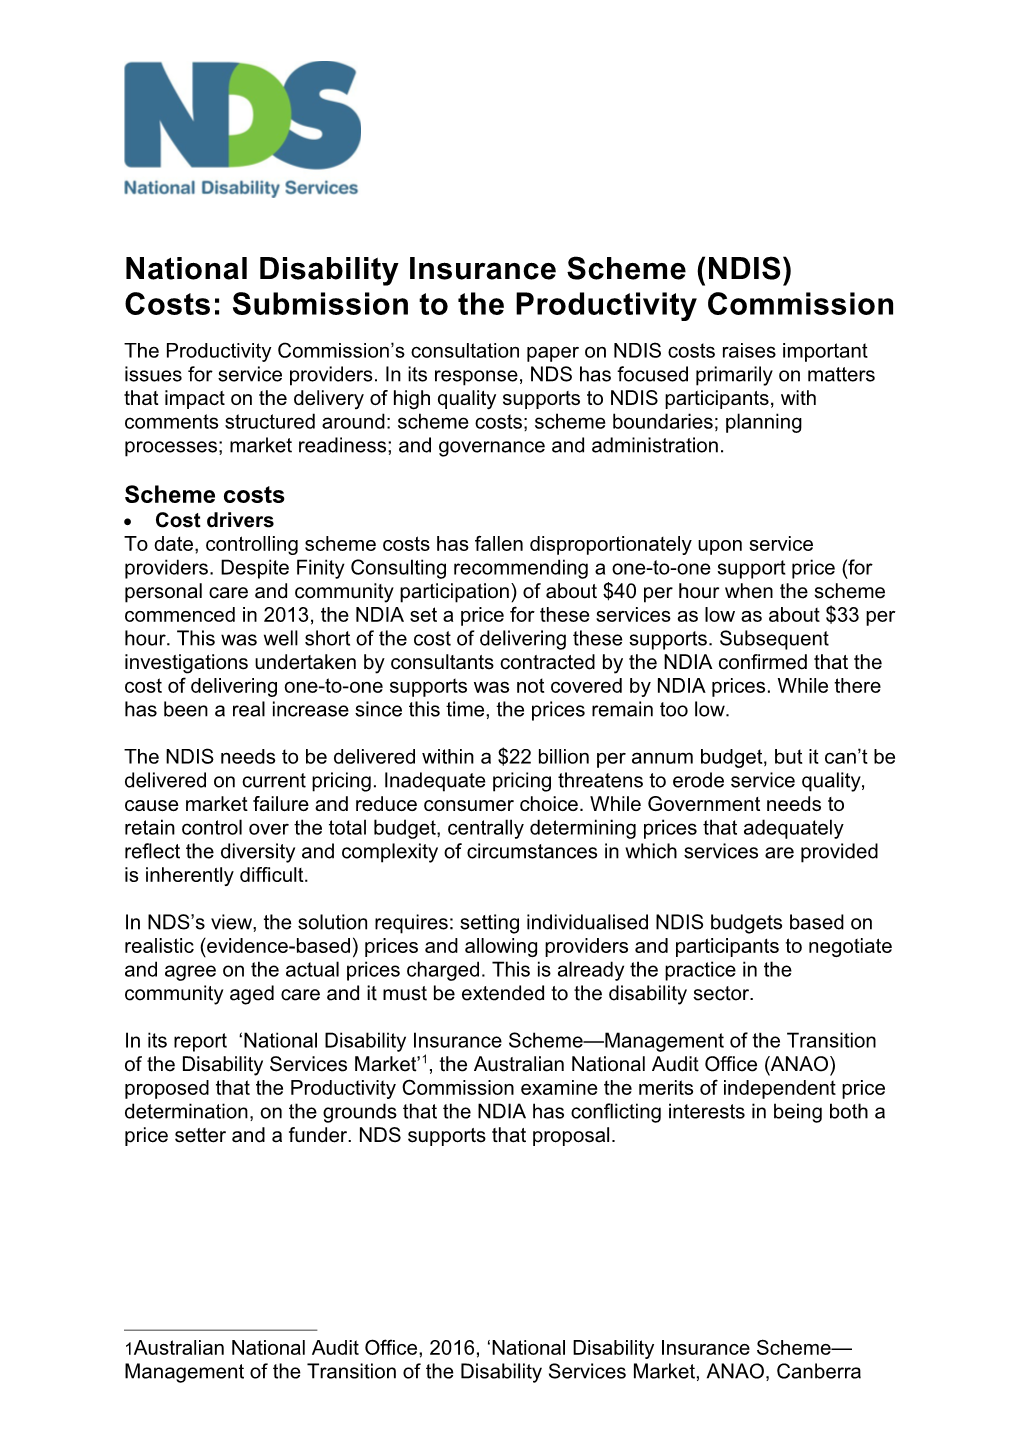 Submission 51 - National Disability Services (NDS) - National Disability Insurance Scheme